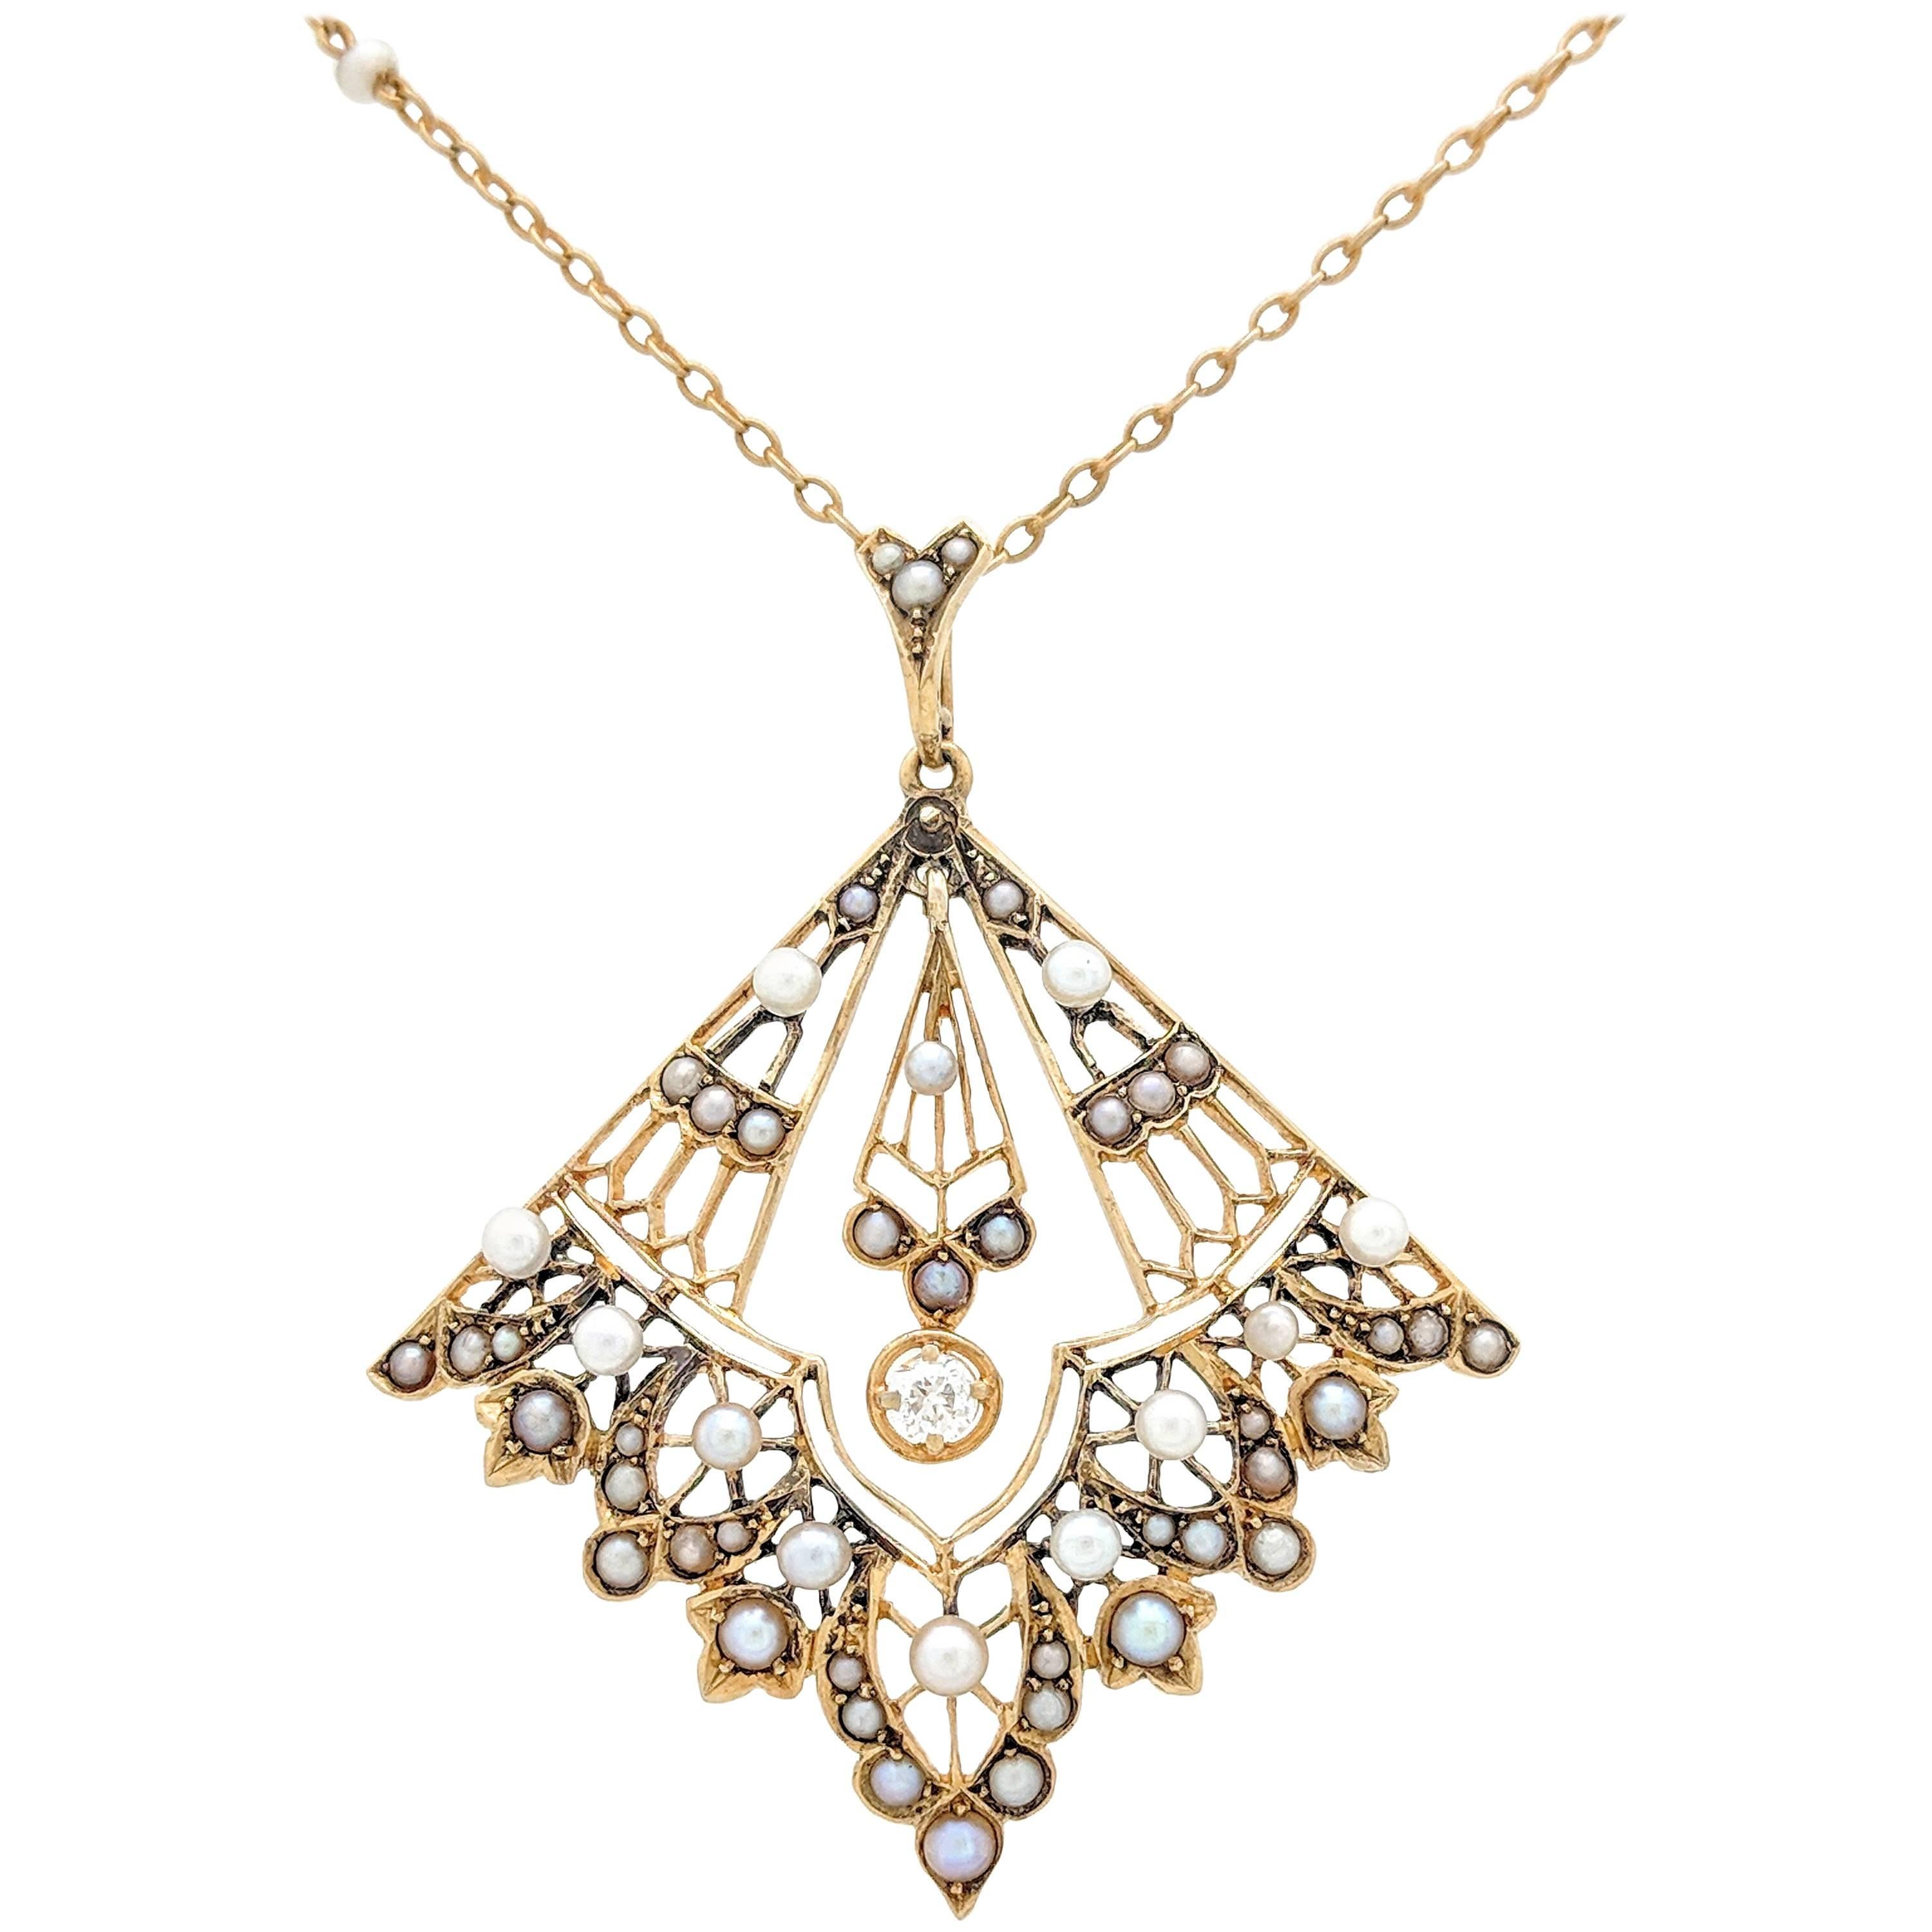 14 Karat Yellow Gold Victorian Diamond and Seed Pearl Pendant Necklace